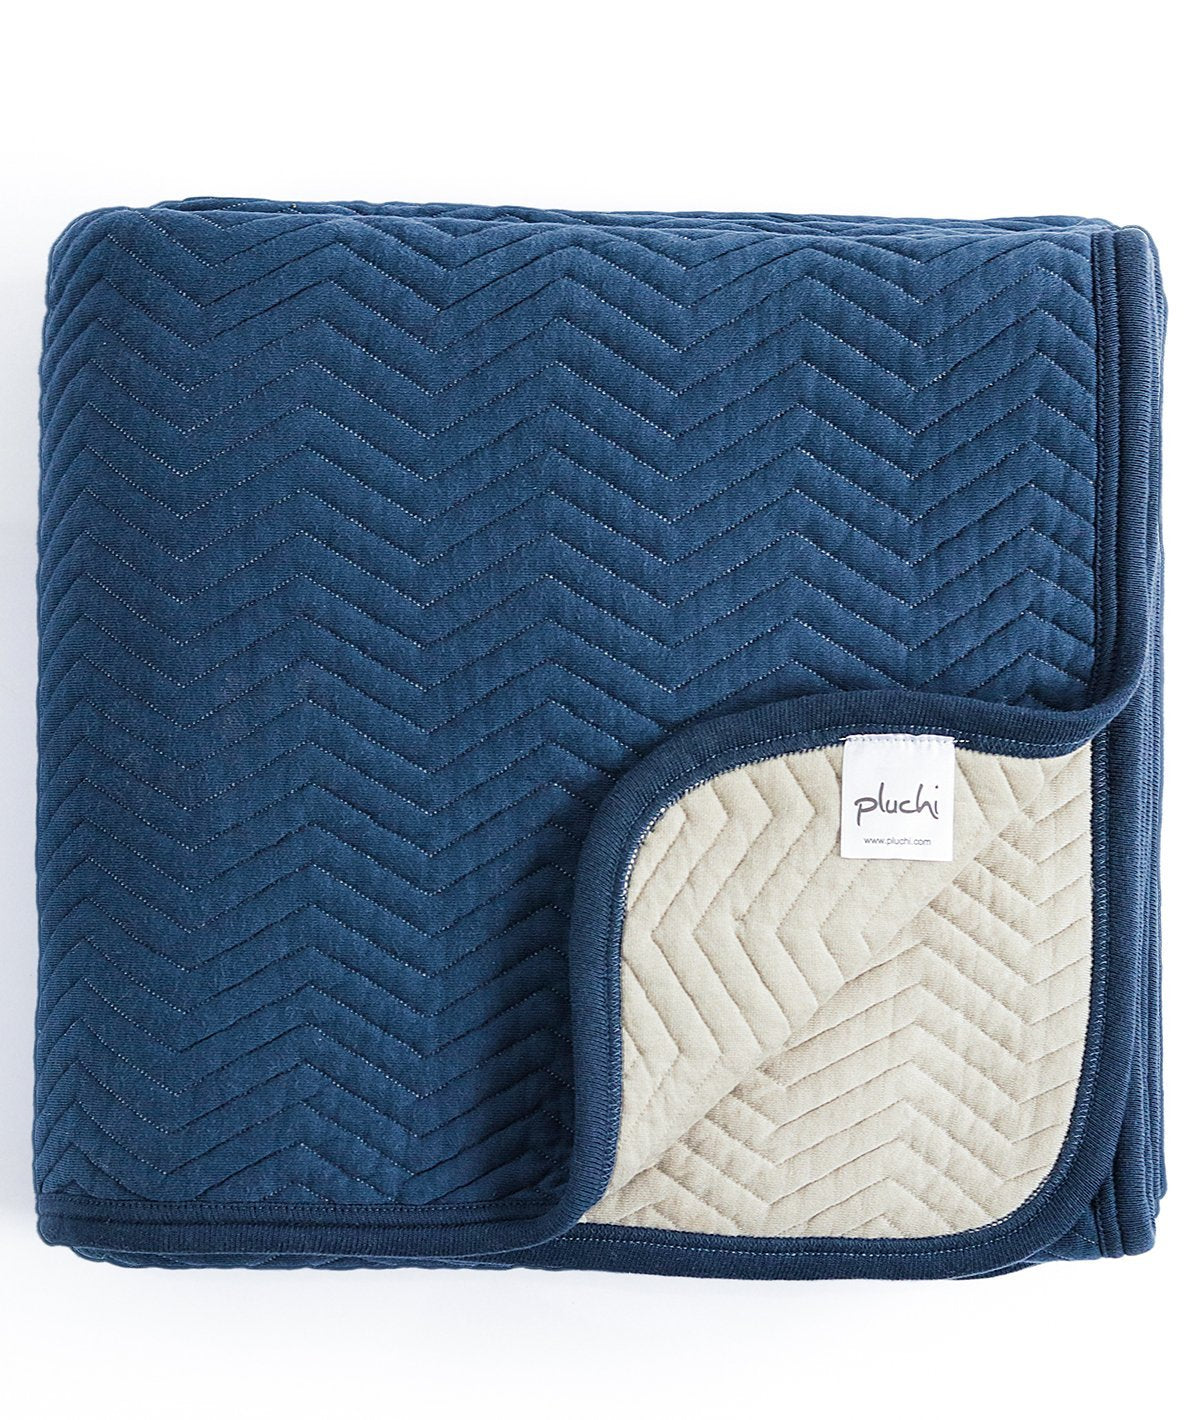 Zig  Zag -  Navy Cotton Knitted Single Bed Quilt / Quilted Blanket